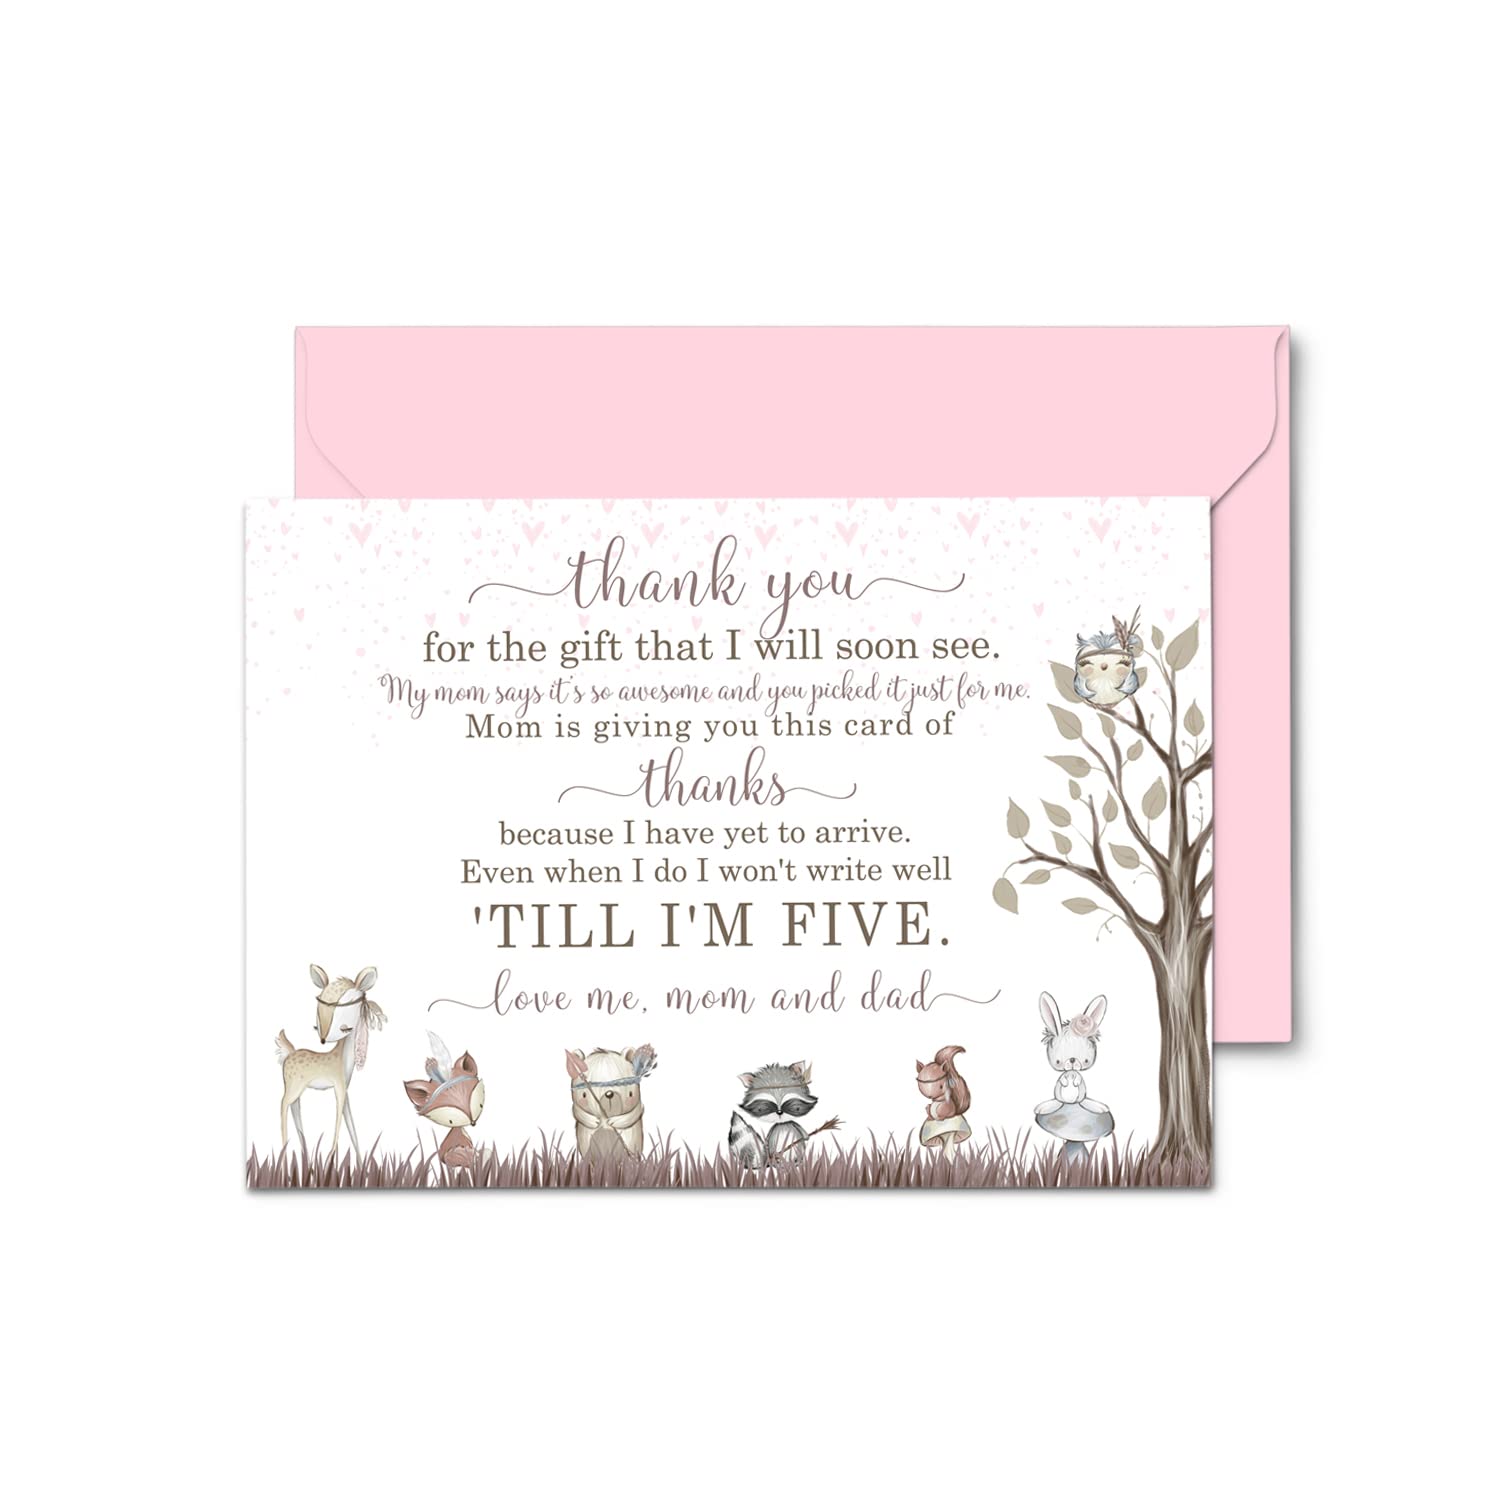 Girls Woodland Baby Shower Thank You Cards and Envelopes (15 Pack) Girls Notecards with Message from Babies – Rustic Floral Pink Boho Stationery Set 4x6